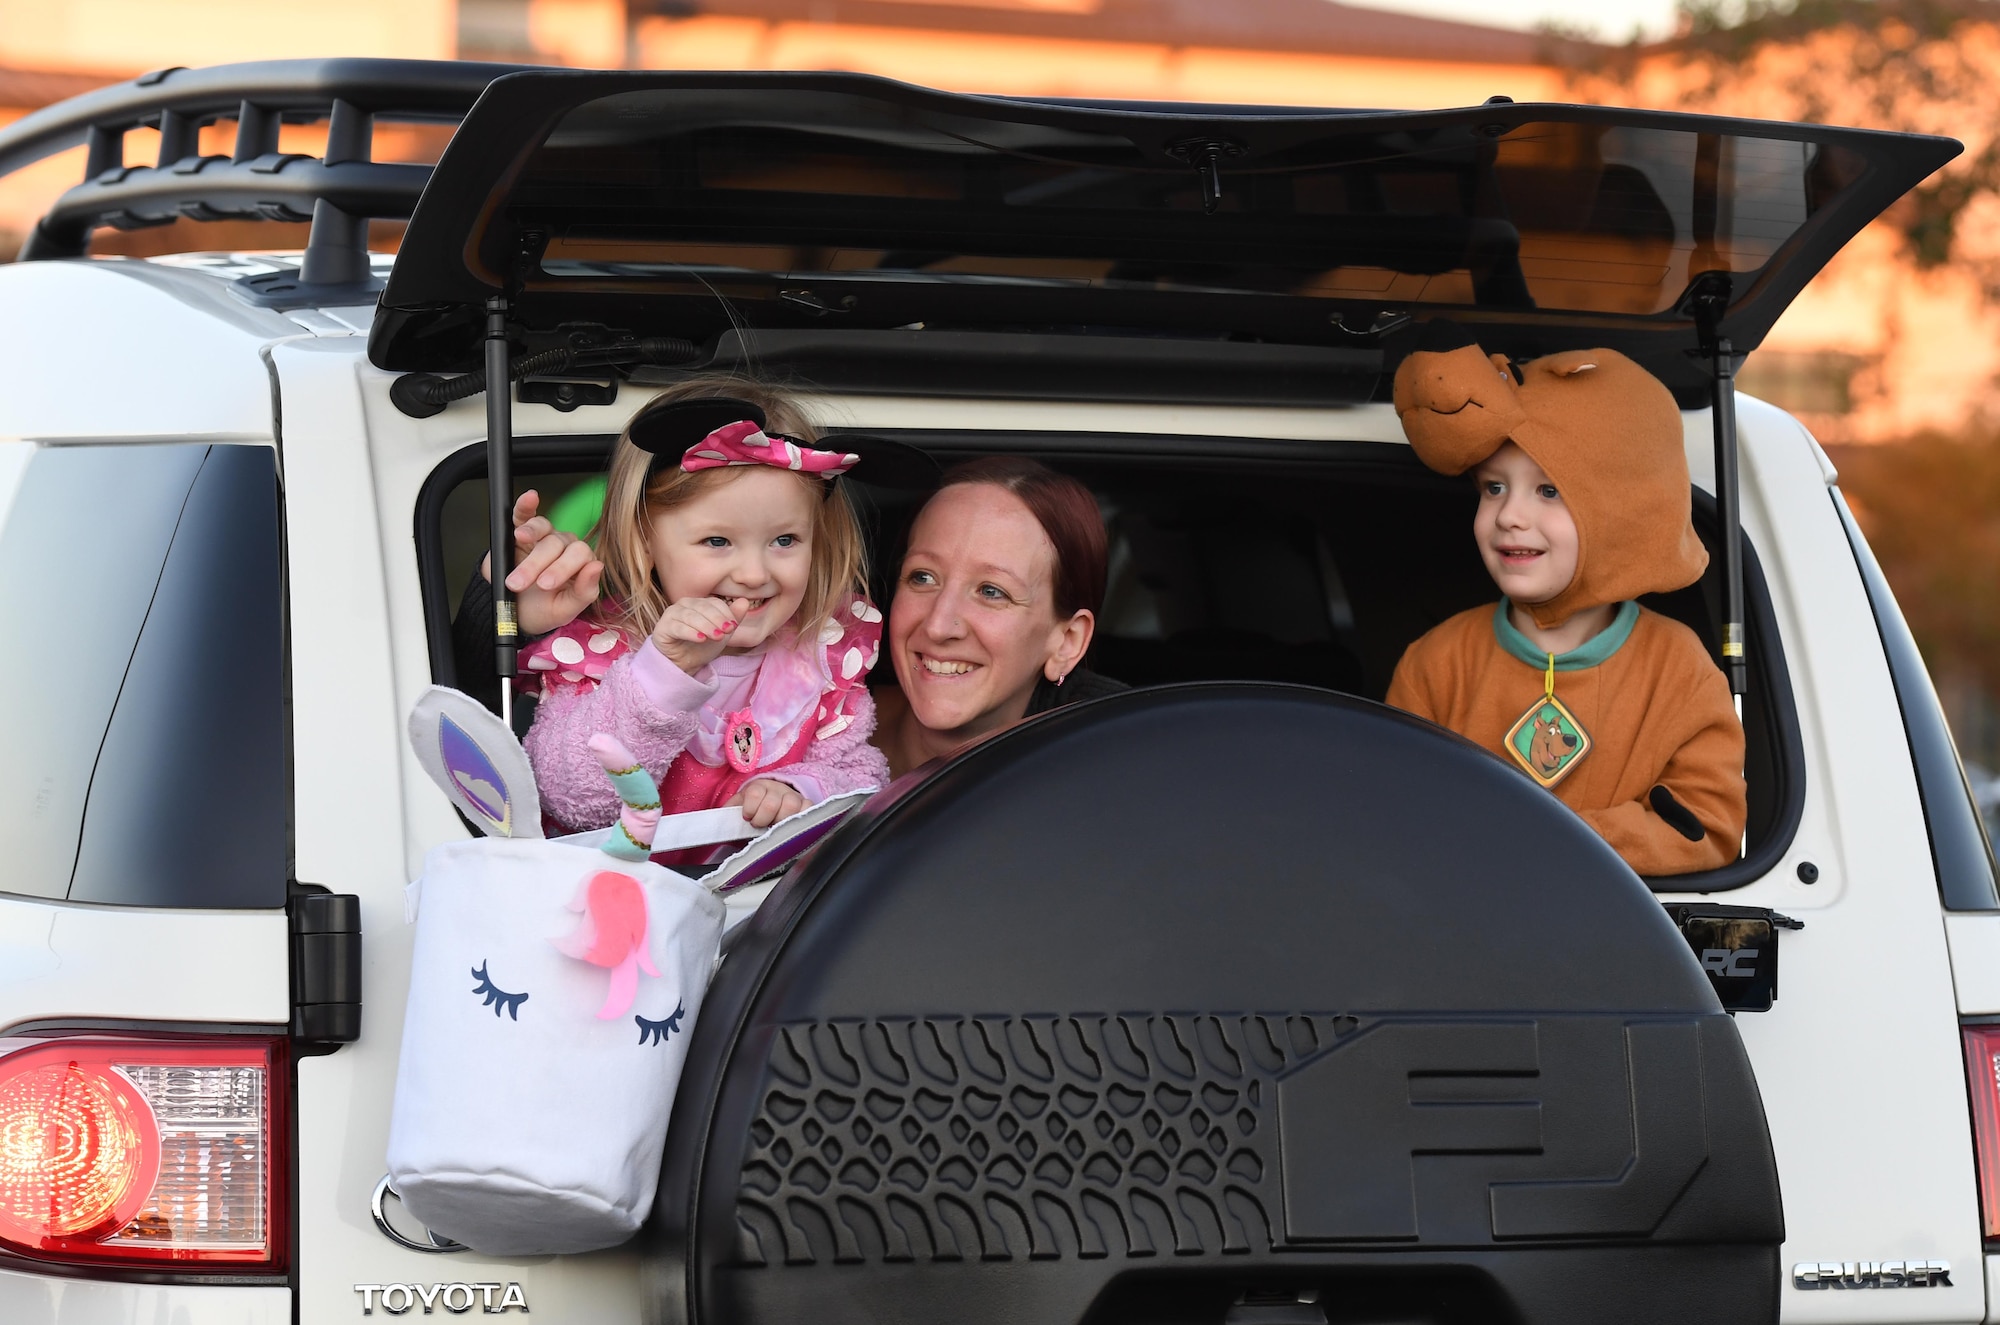 Ashley Norgard, spouse of U.S. Air Force Tech. Sgt. Richard Norgard, 334th Training Squadron instructor, and their children, Mila and Hanz, ride in the back of their truck during the Ghouls in the Park drive-thru event at the Bay Breeze Event Center parking lot at Keesler Air Force Base, Mississippi, Oct. 30, 2020. The 81st Force Support Squadron hosted the "trunk or treat" event for children of all ages. (U.S. Air Force photo by Kemberly Groue)